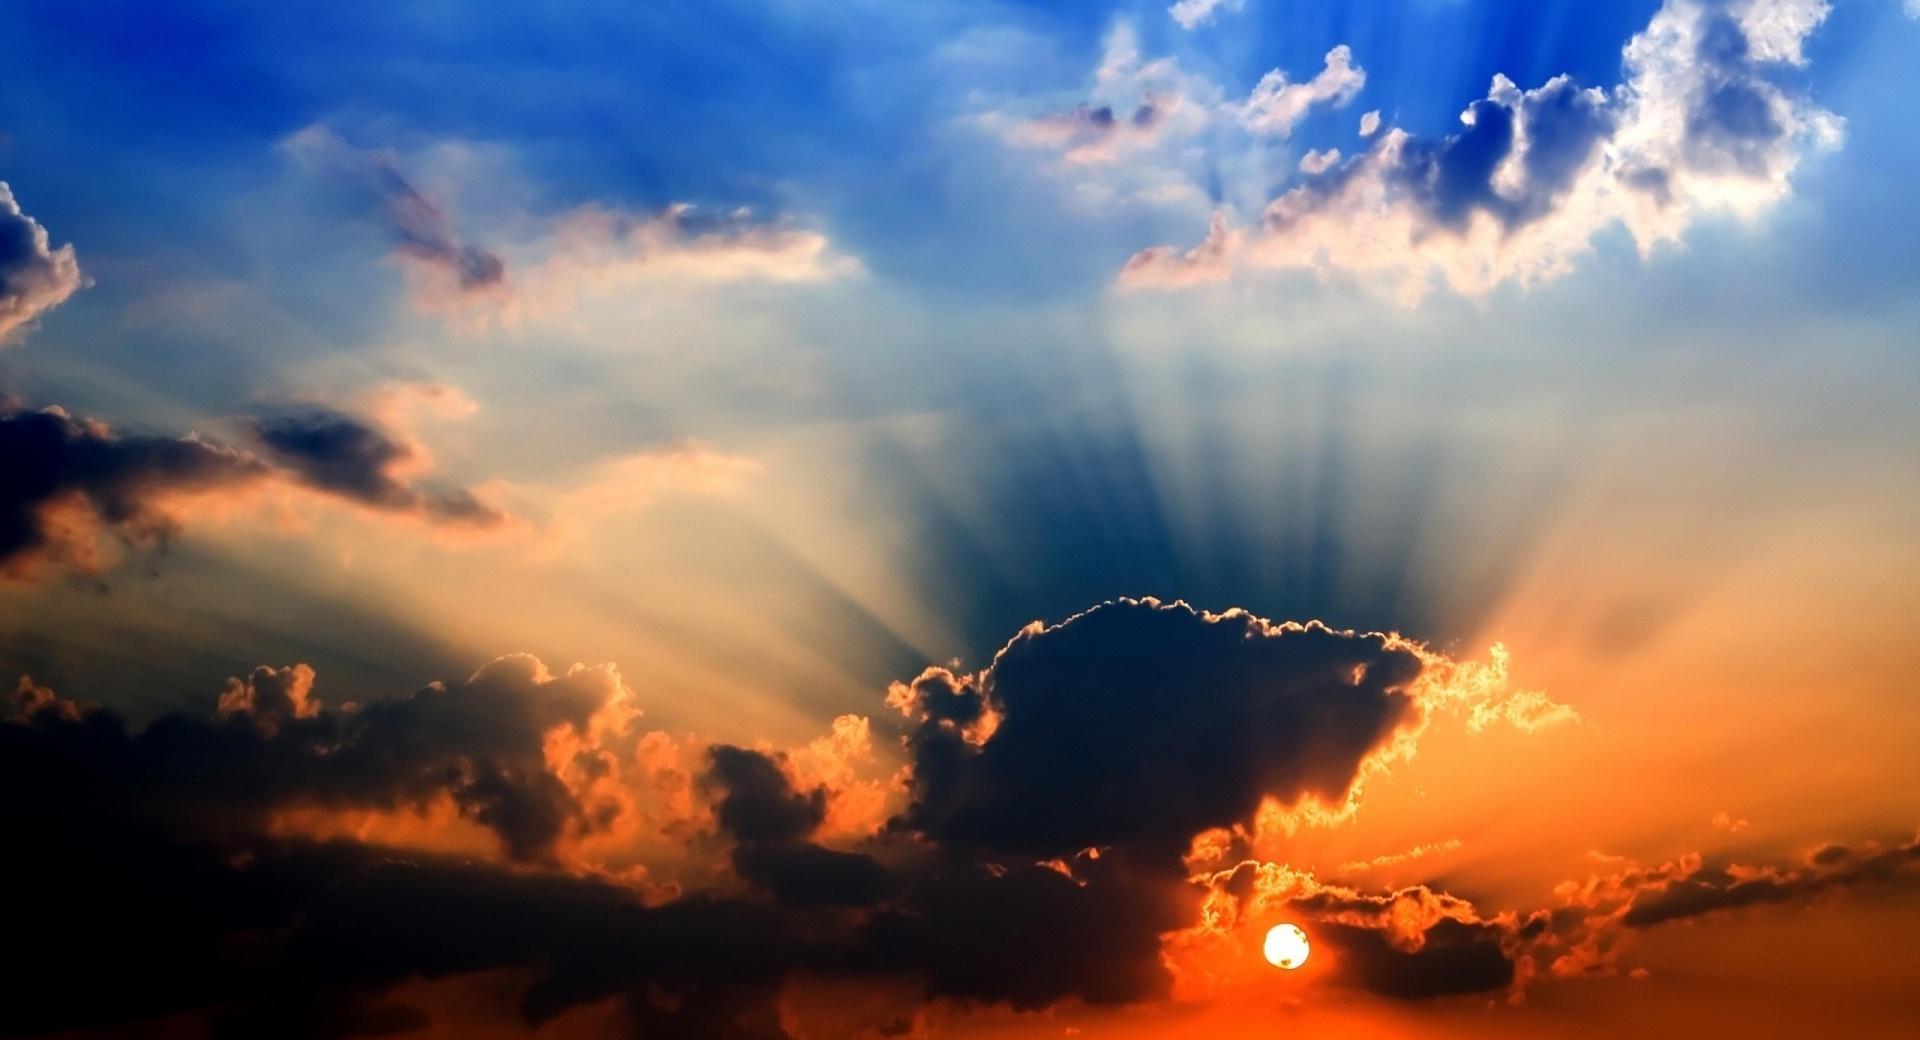 Sunbeams Through Clouds wallpapers HD quality